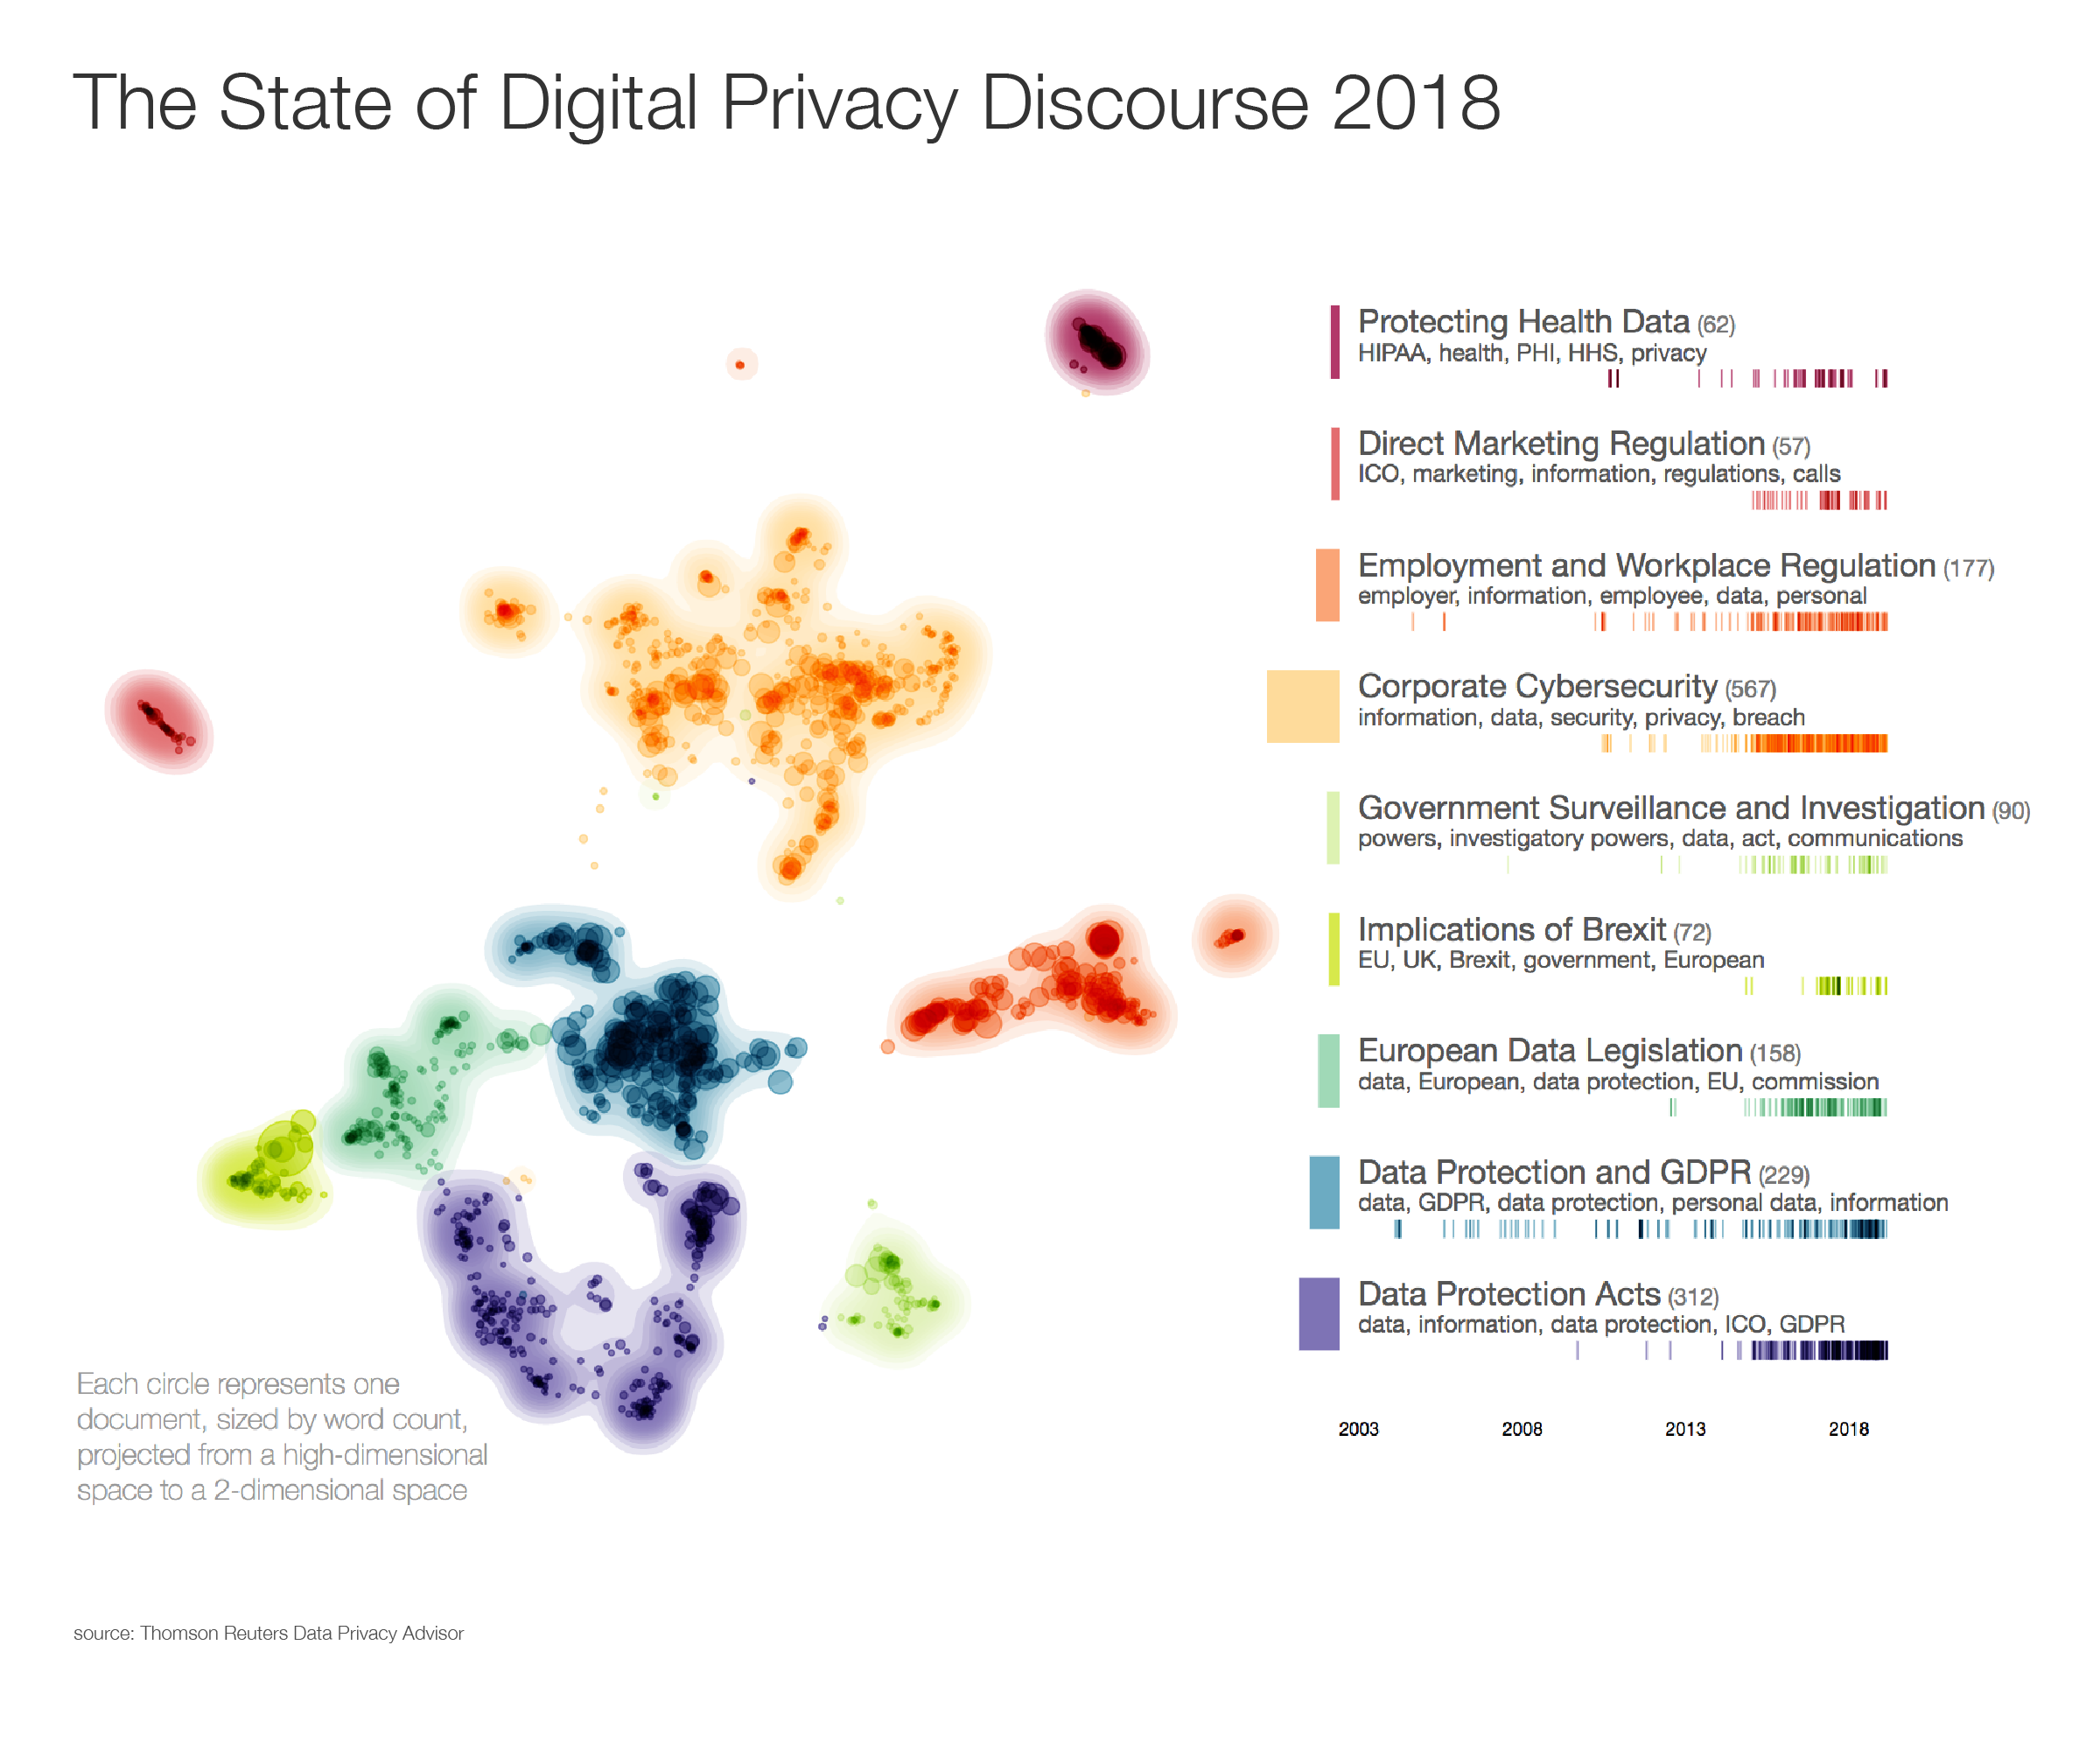 To investigate how data privacy is being addressed in the legal sphere, Thomson Reuters Labs analyzed over two thousand practical law documents published between 2013 and 2018 from Thomson Reuters Data Privacy Advisor.